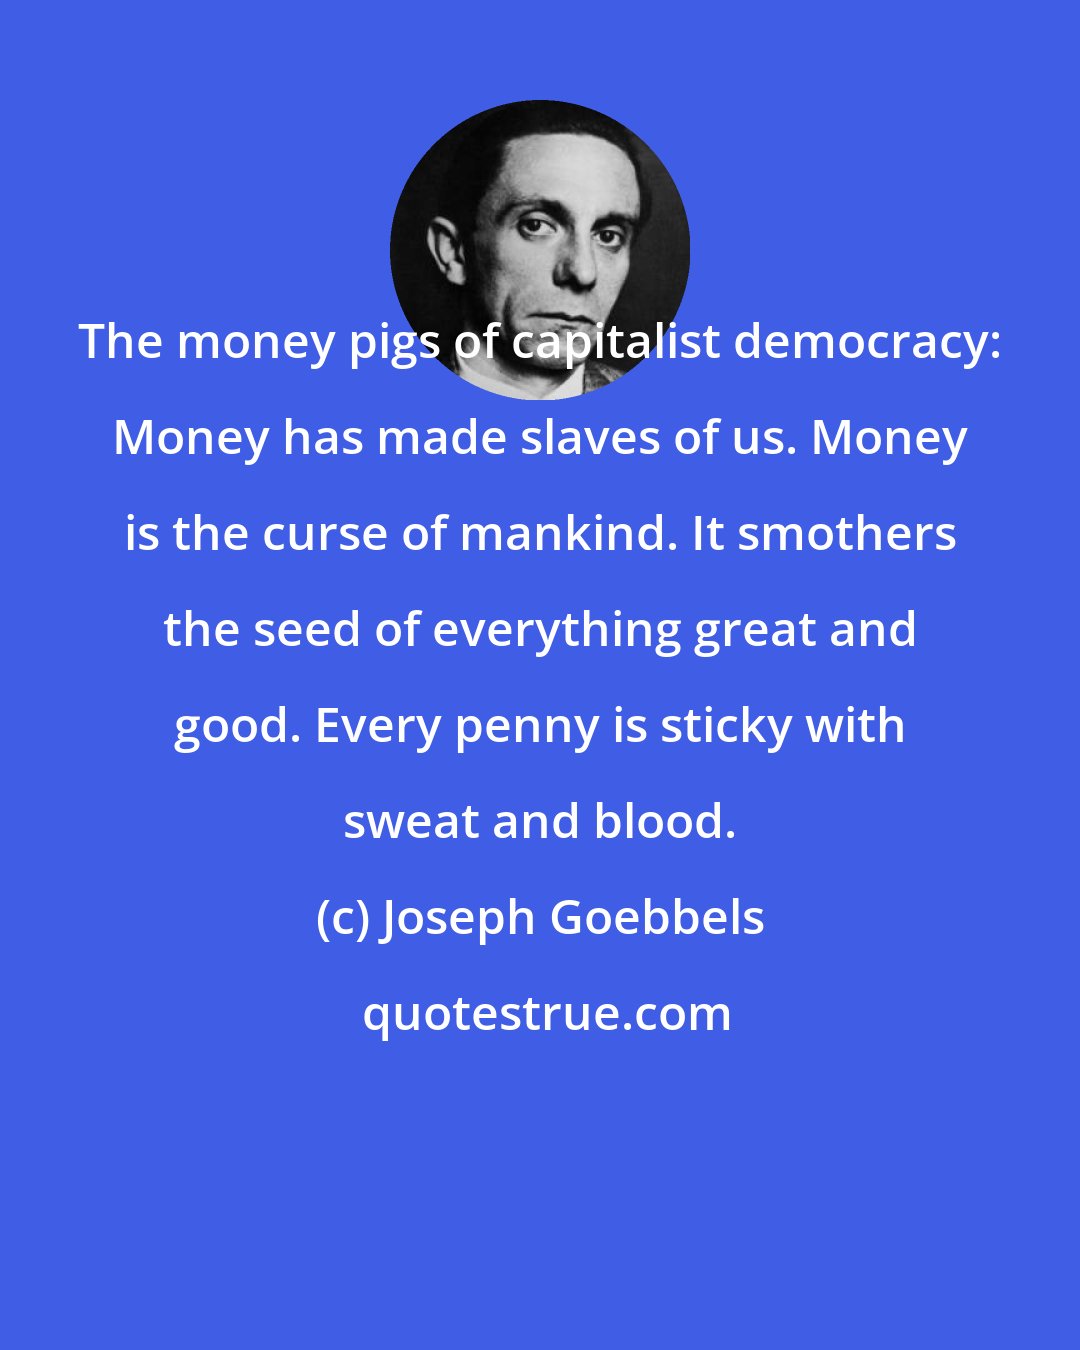 Joseph Goebbels: The money pigs of capitalist democracy: Money has made slaves of us. Money is the curse of mankind. It smothers the seed of everything great and good. Every penny is sticky with sweat and blood.